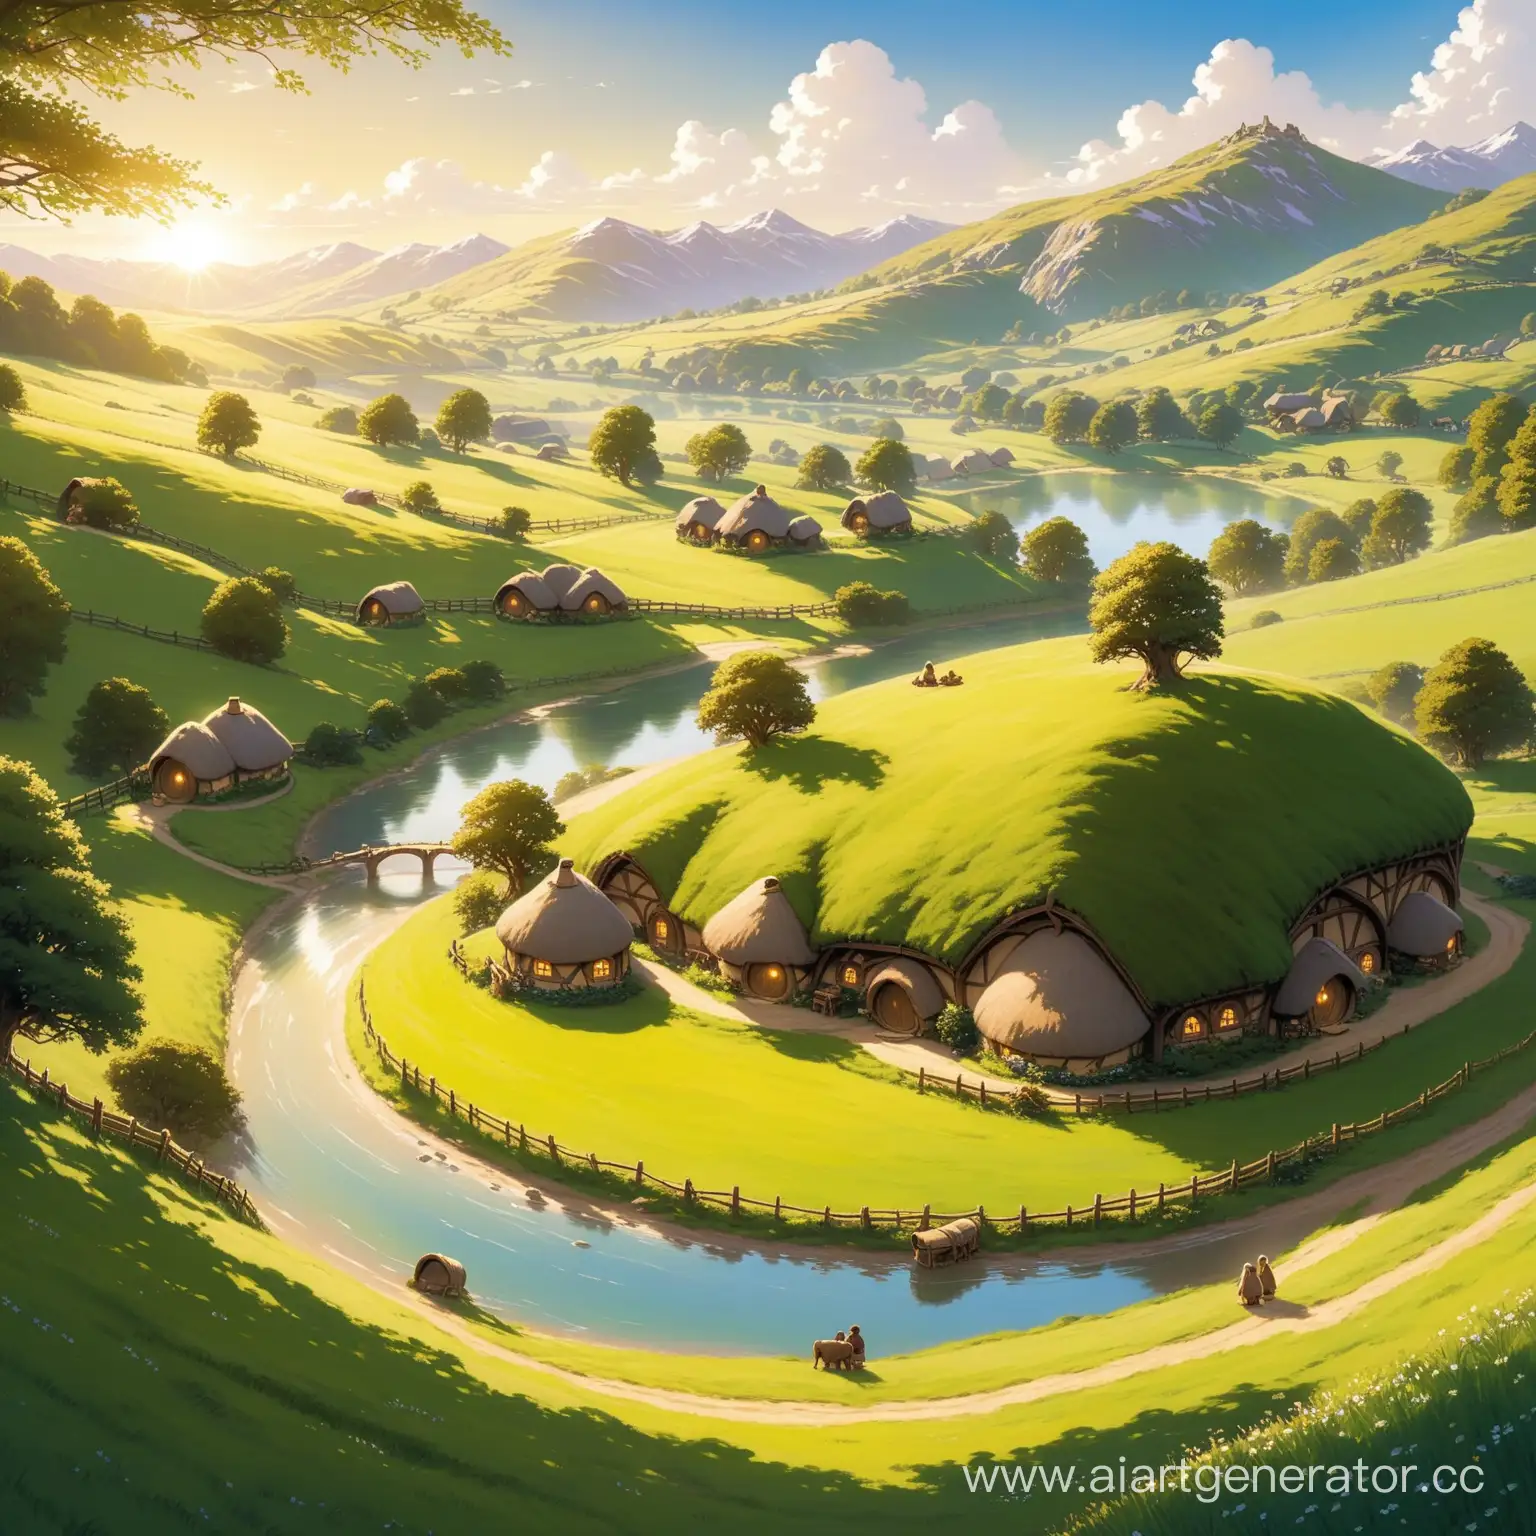 Sunny-Shire-Landscape-with-Hobbits-Engaged-in-Daily-Activities